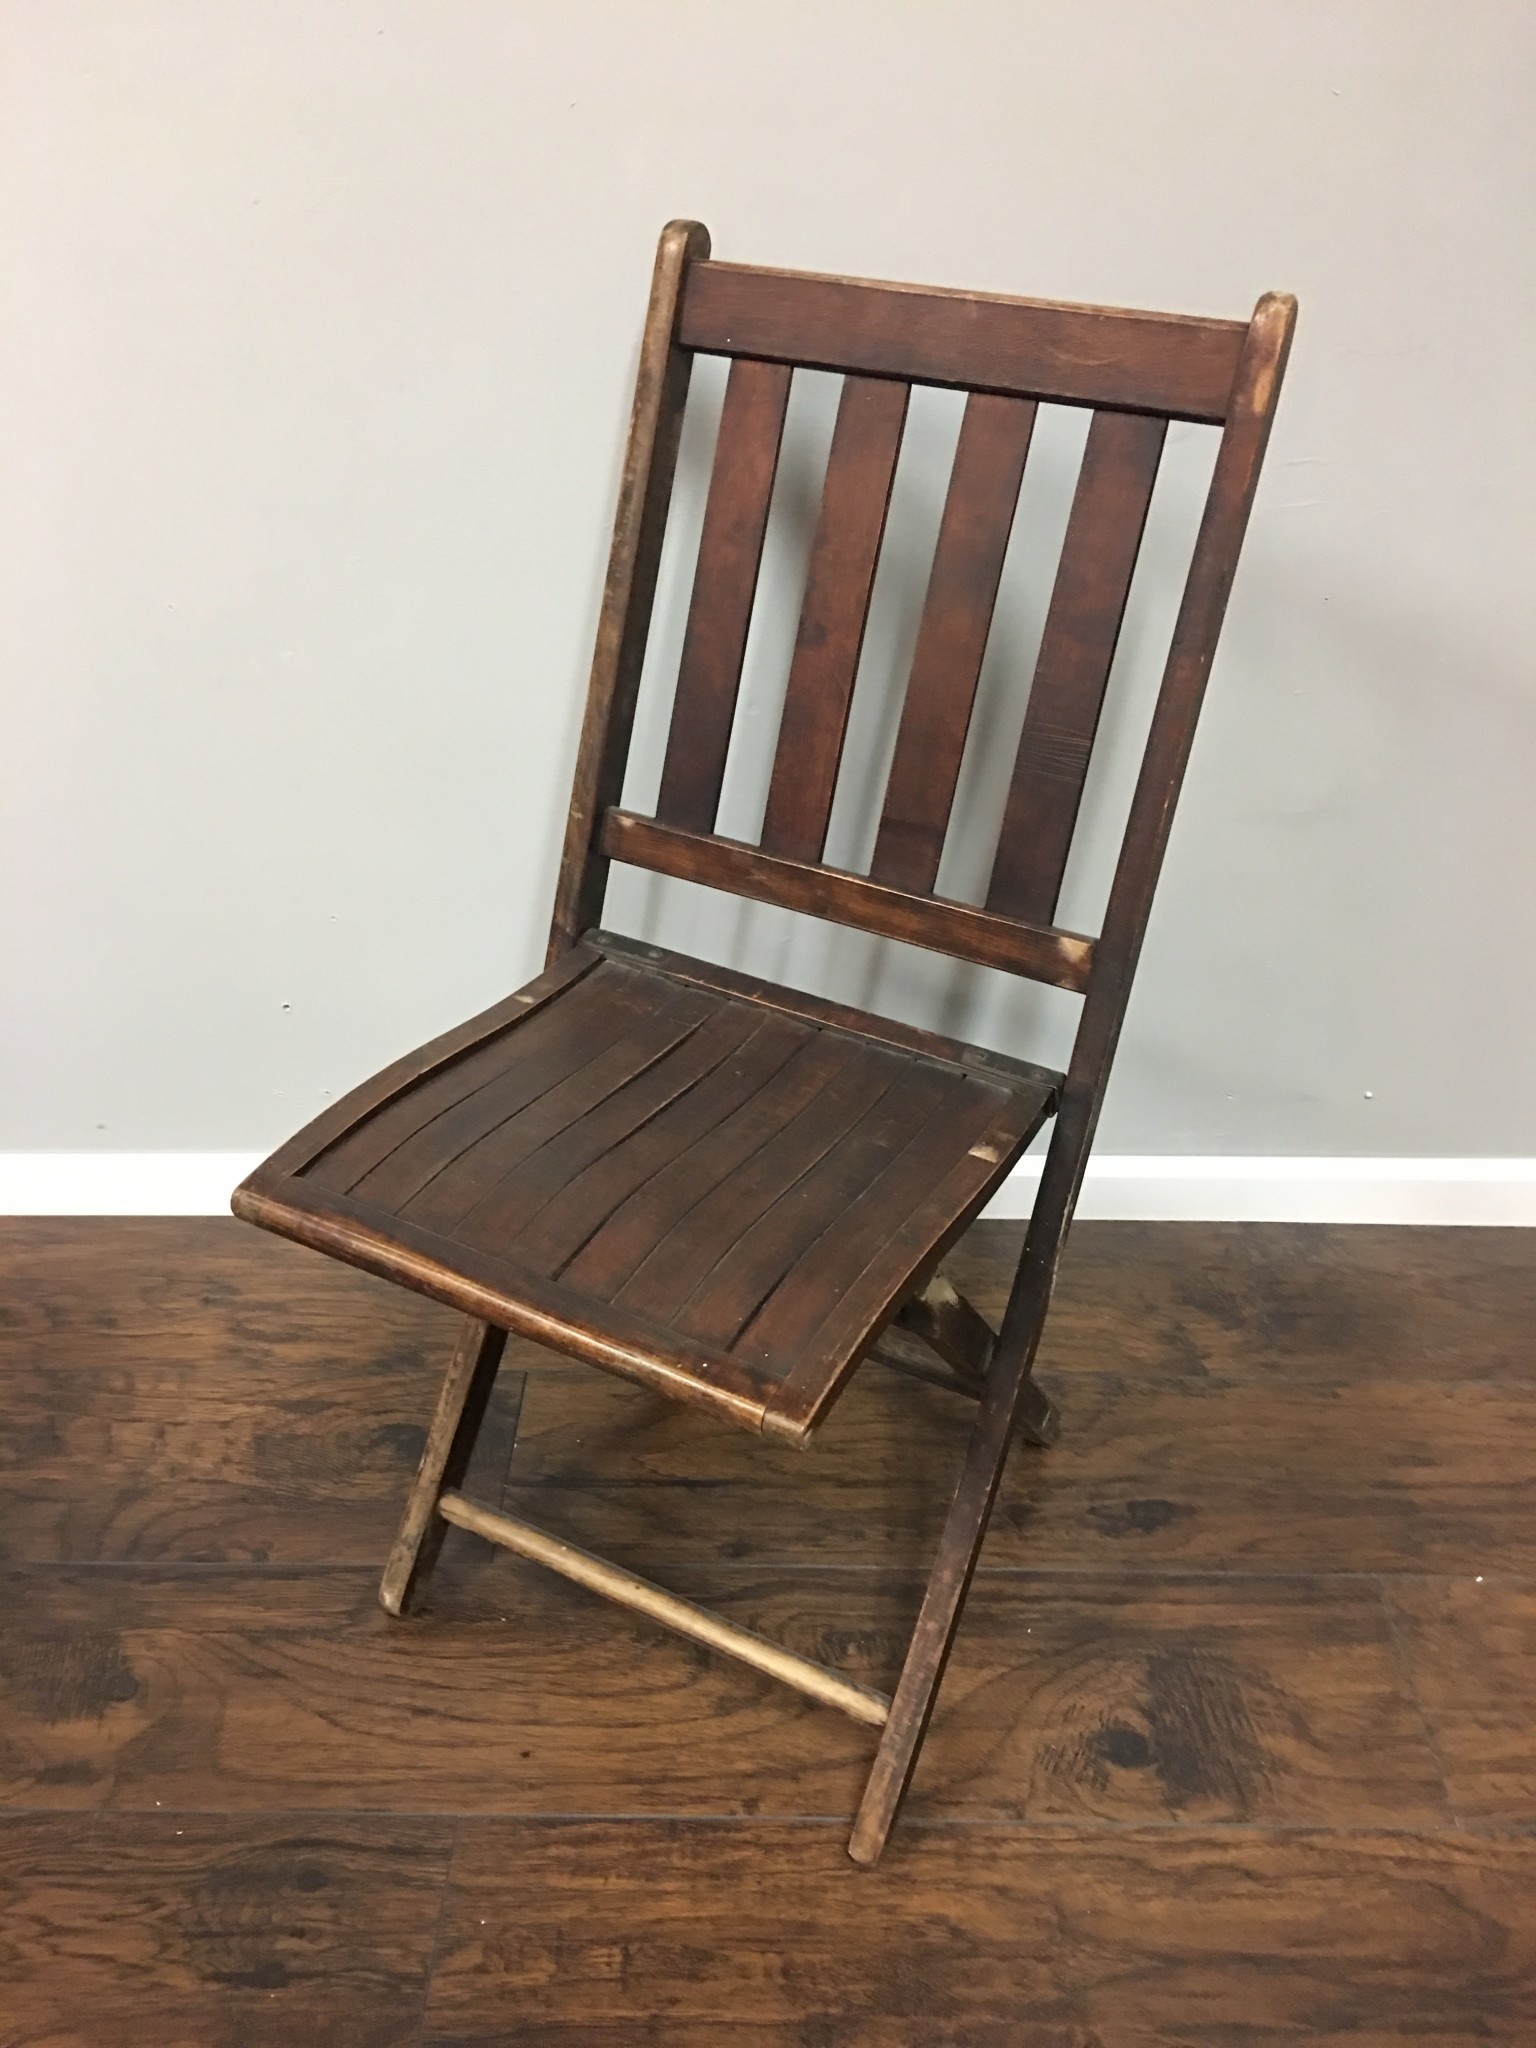 Vintage Wooden Folding Chair - Heirloom Home